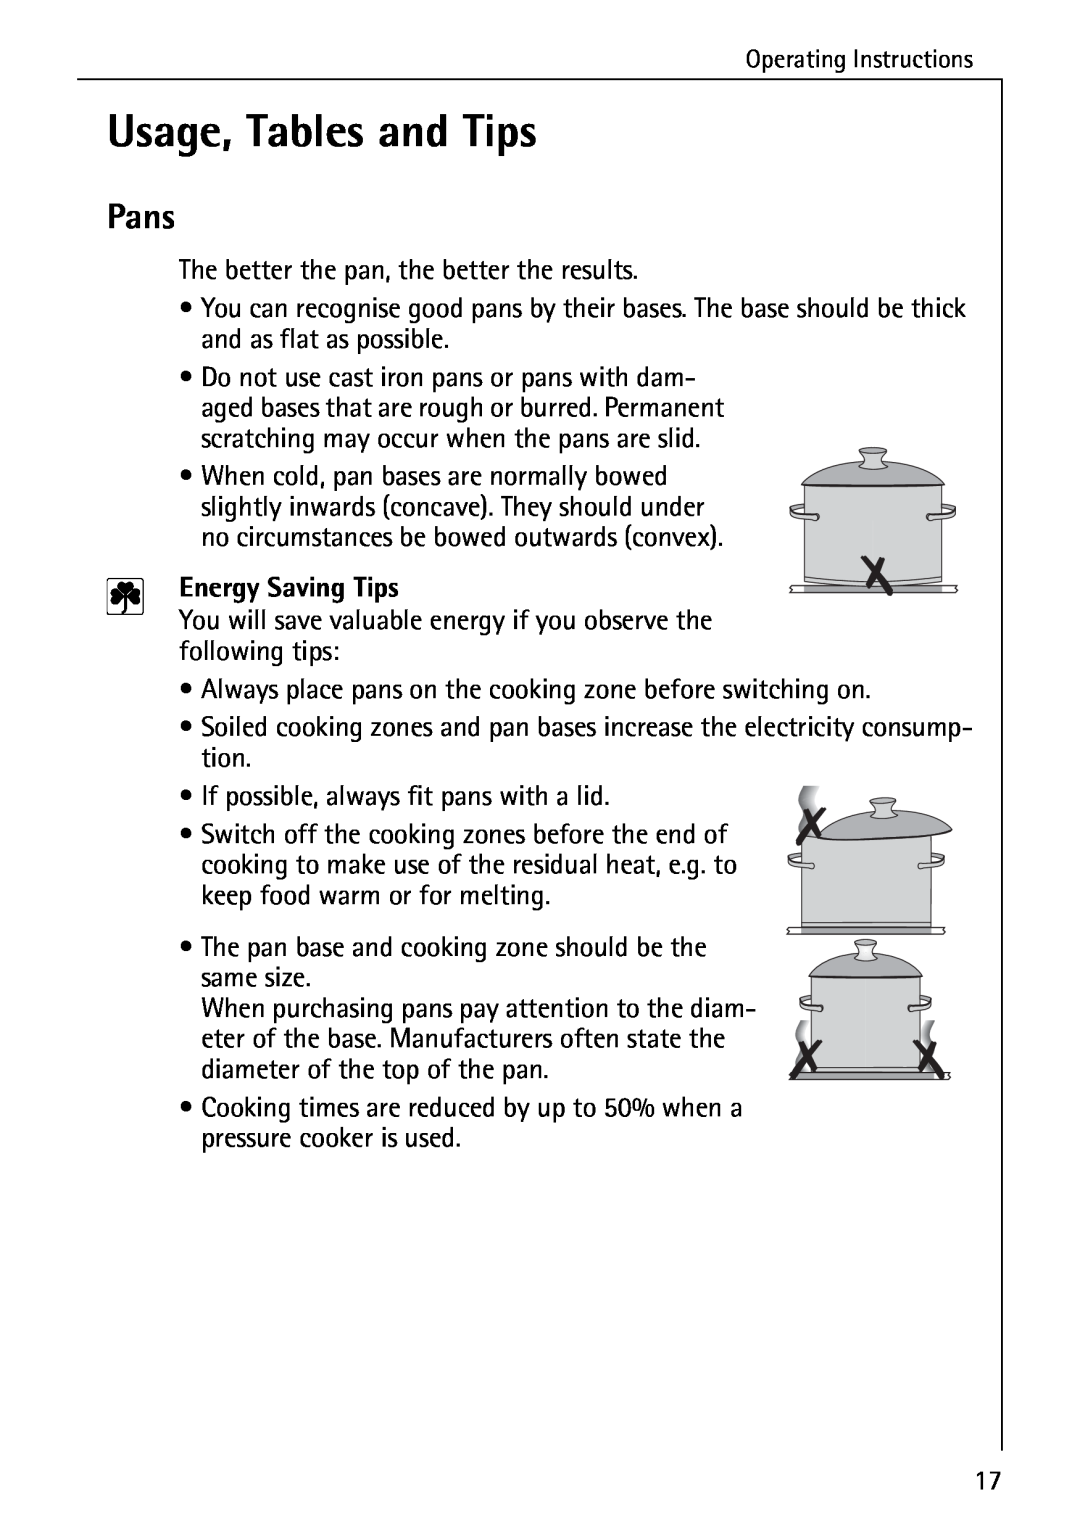 AEG 2003 F operating instructions Usage, Tables and Tips, Pans, Energy Saving Tips 